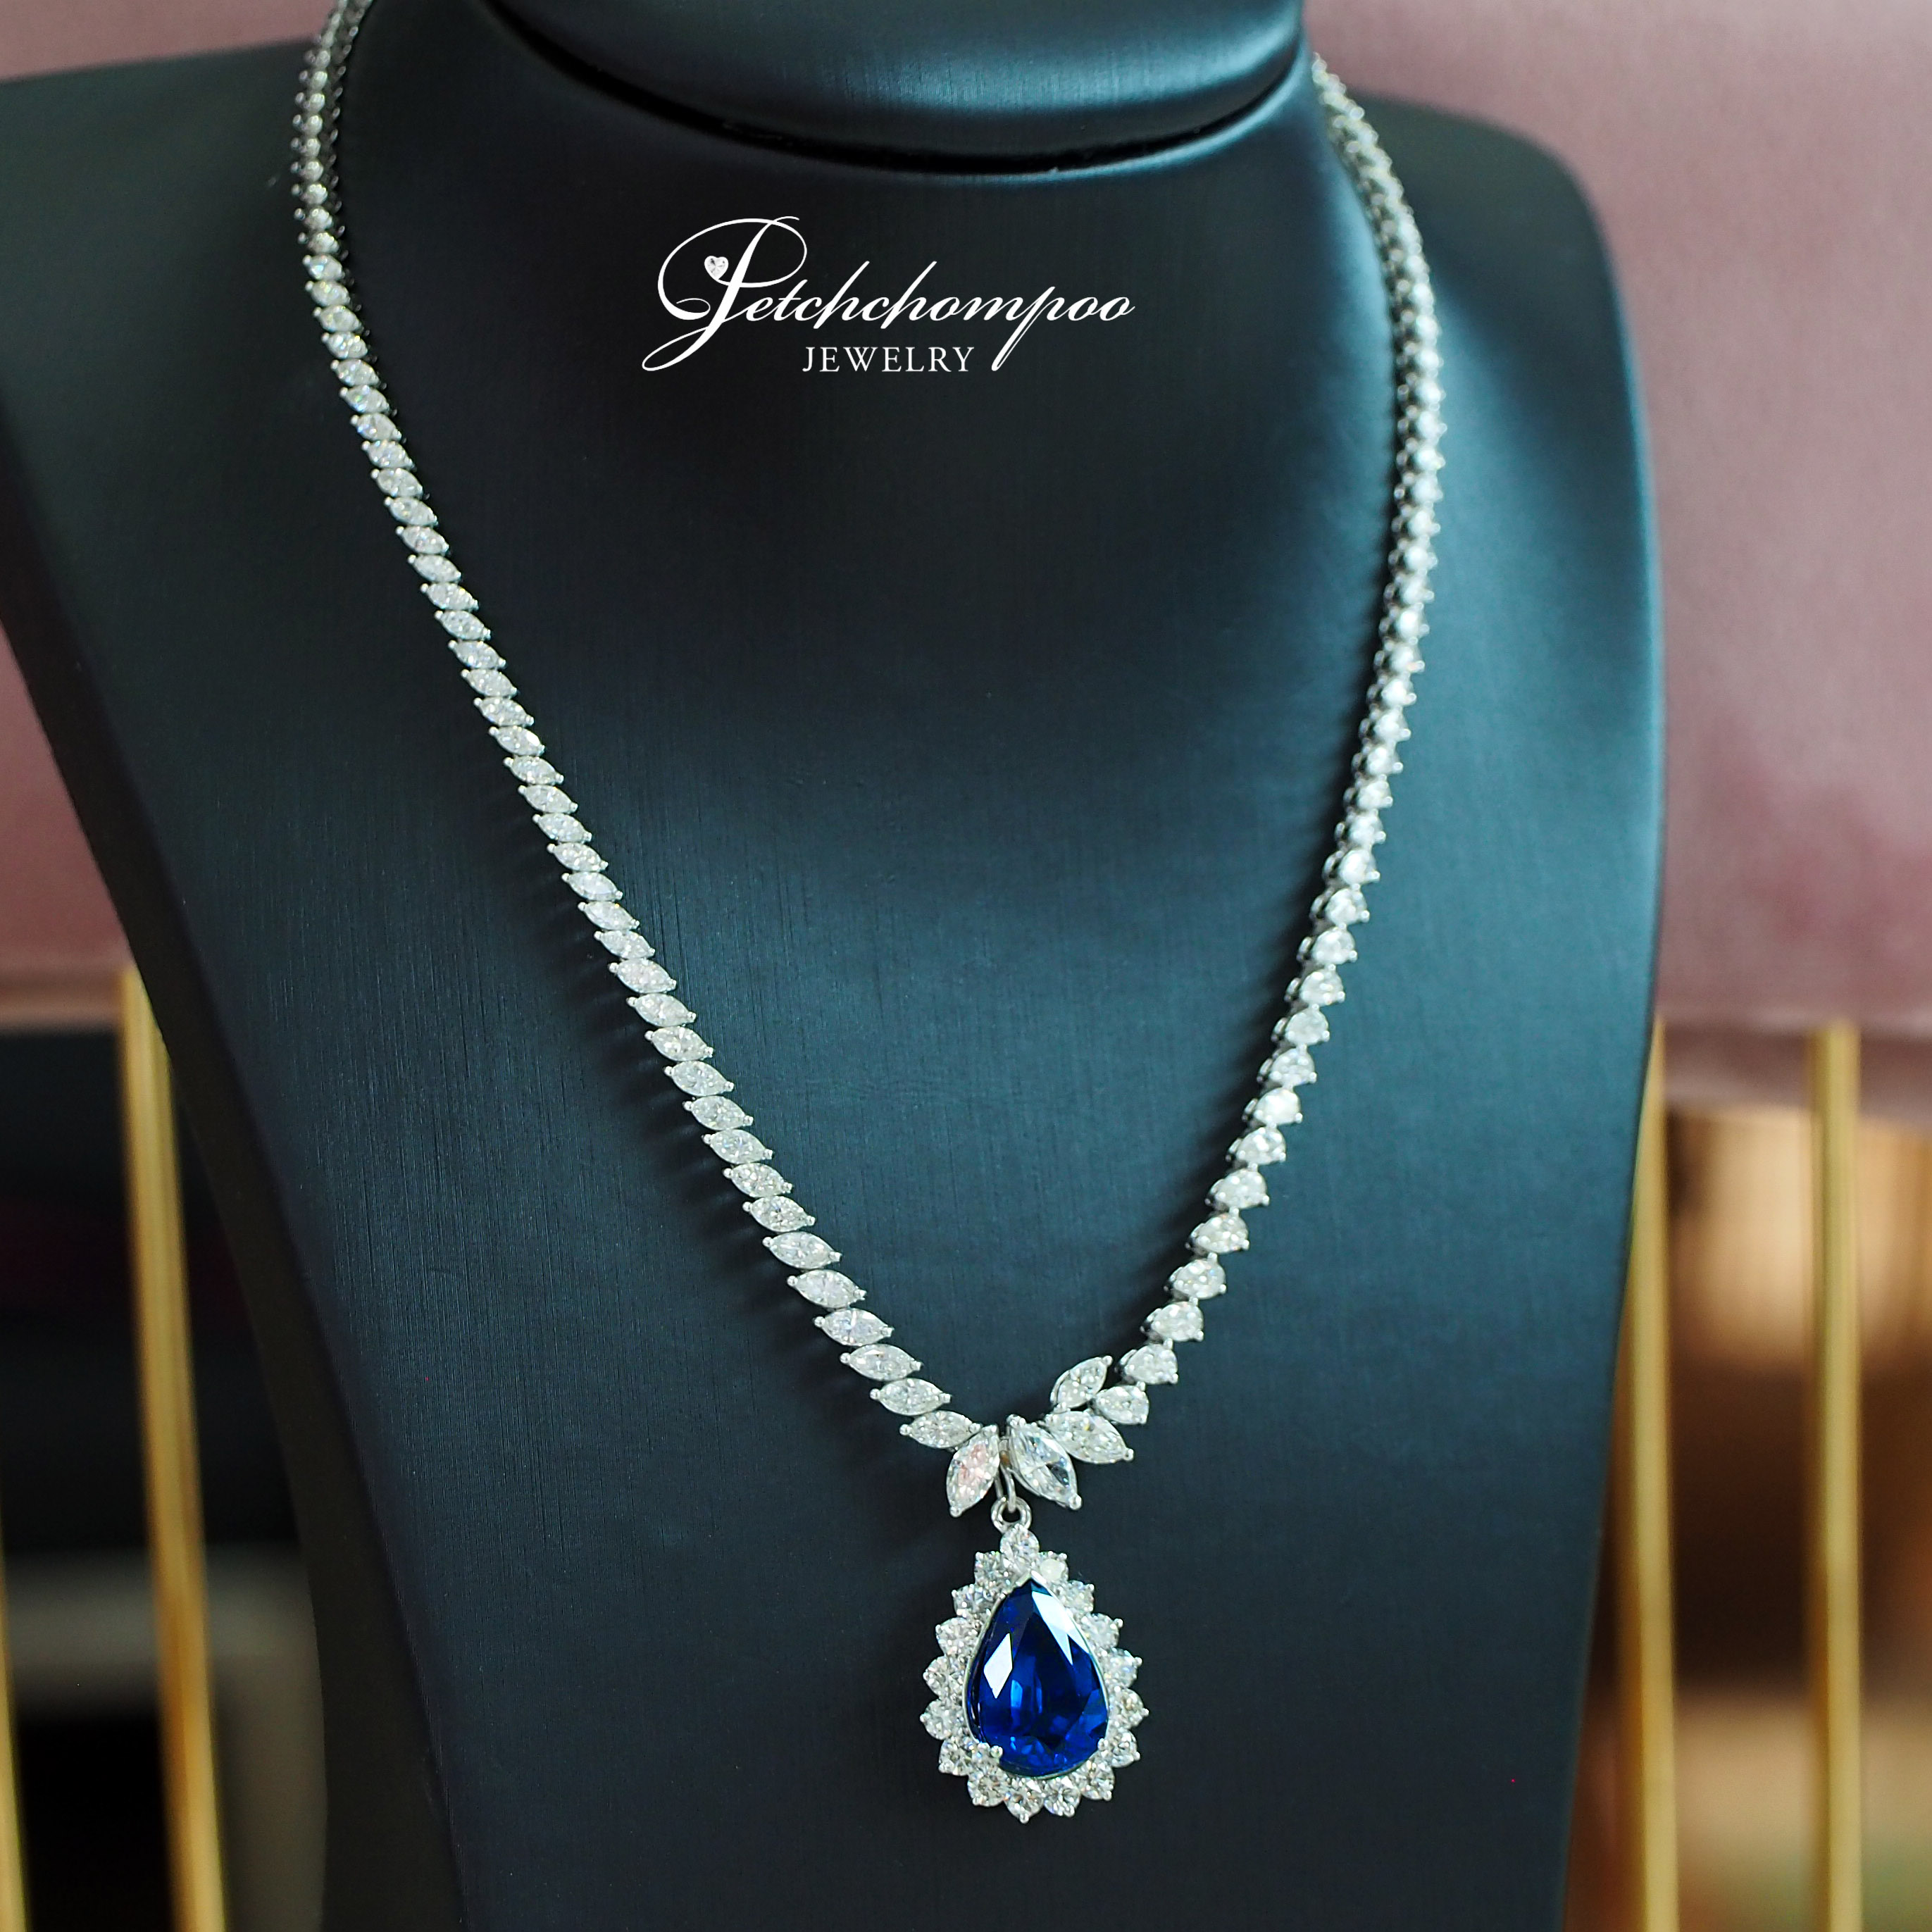 [26779] 7.14 Carat Royal blue ceylon Sapphire with AIGS certificate Necklace  990,000 